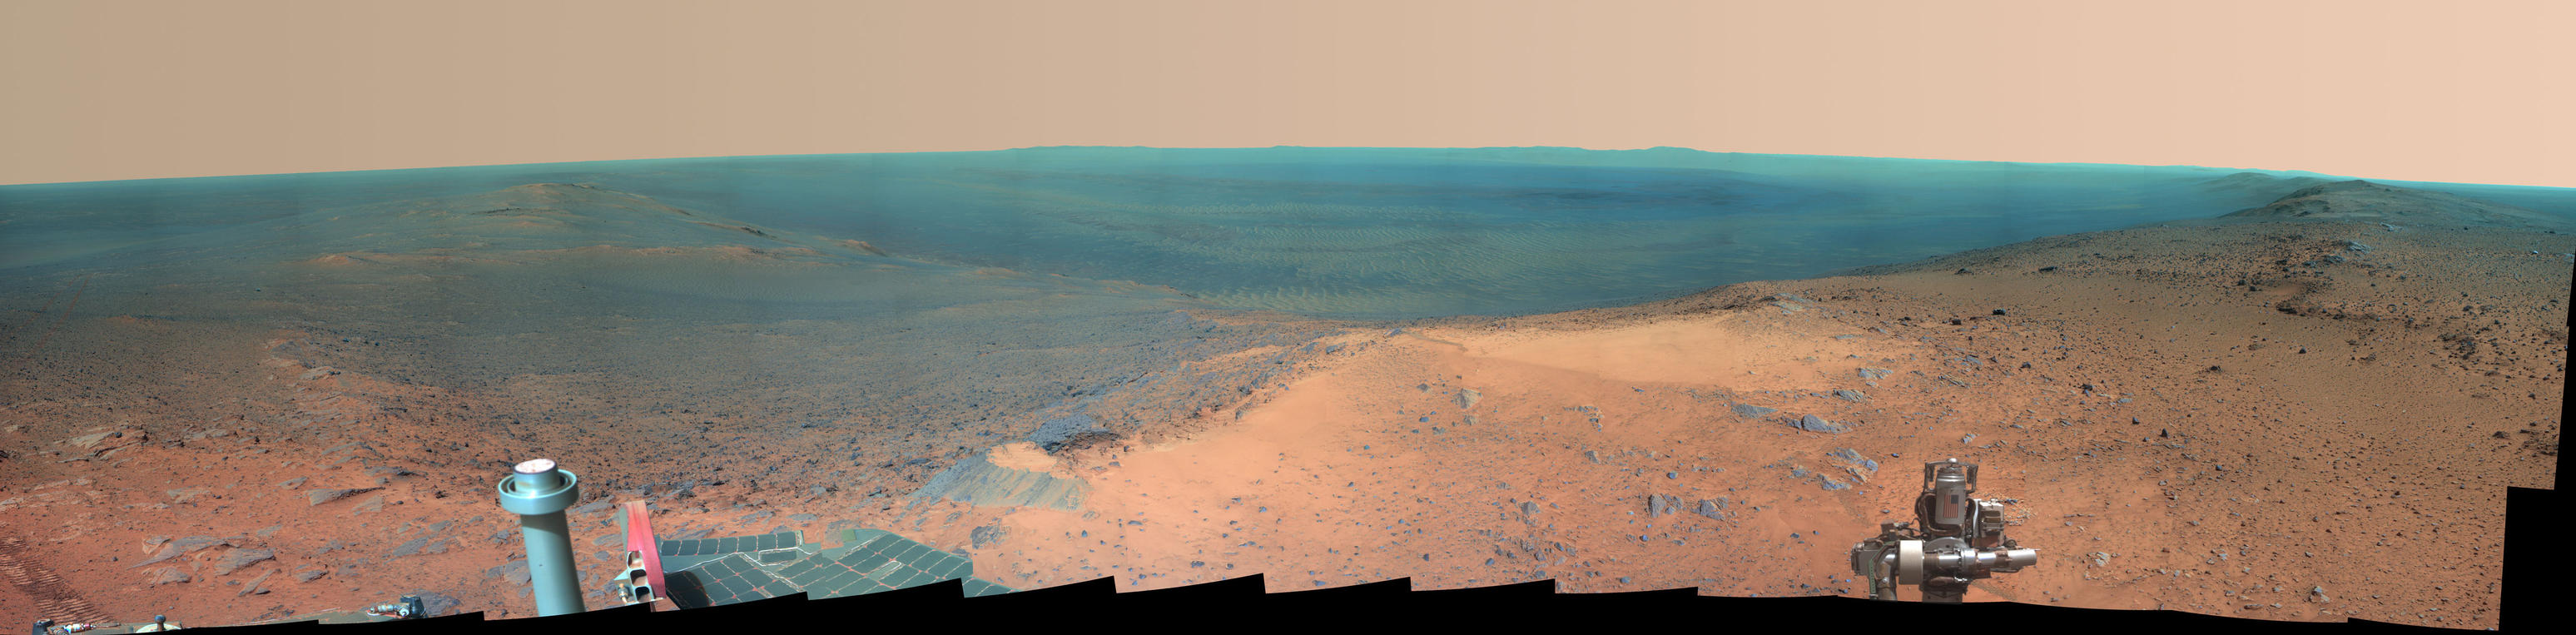 NASA's Mars Exploration Rover Opportunity obtained this view from the top of the "Cape Tribulation" segment of the rim of Endeavour Crater. The rover reached this point three weeks before the 11th anniversary of its January 2004 landing on Mars.